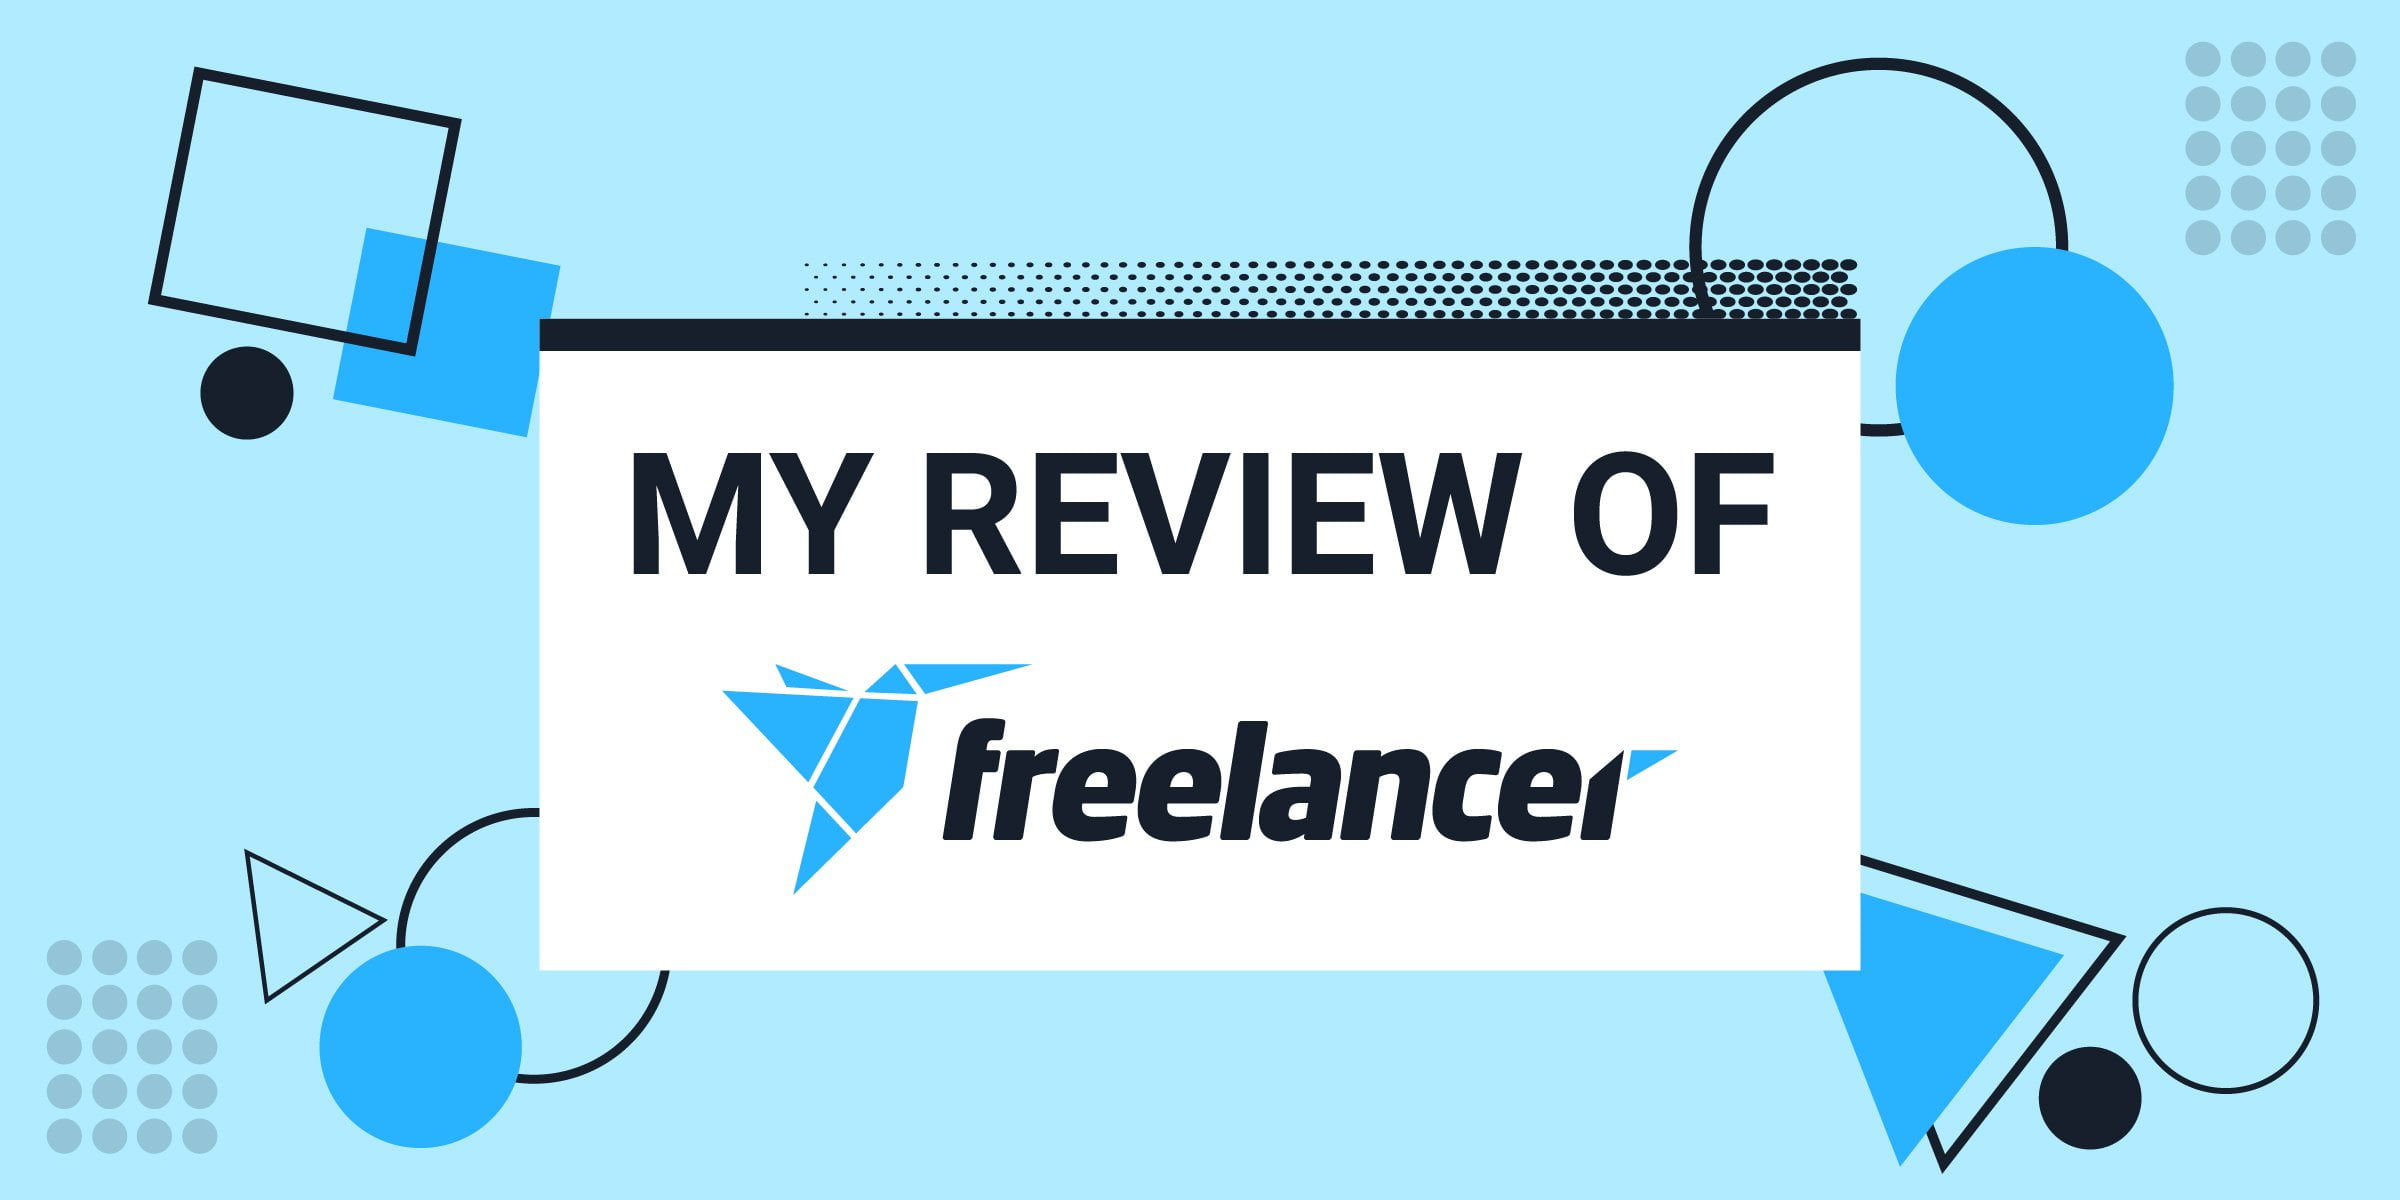 My Review of Freelancer